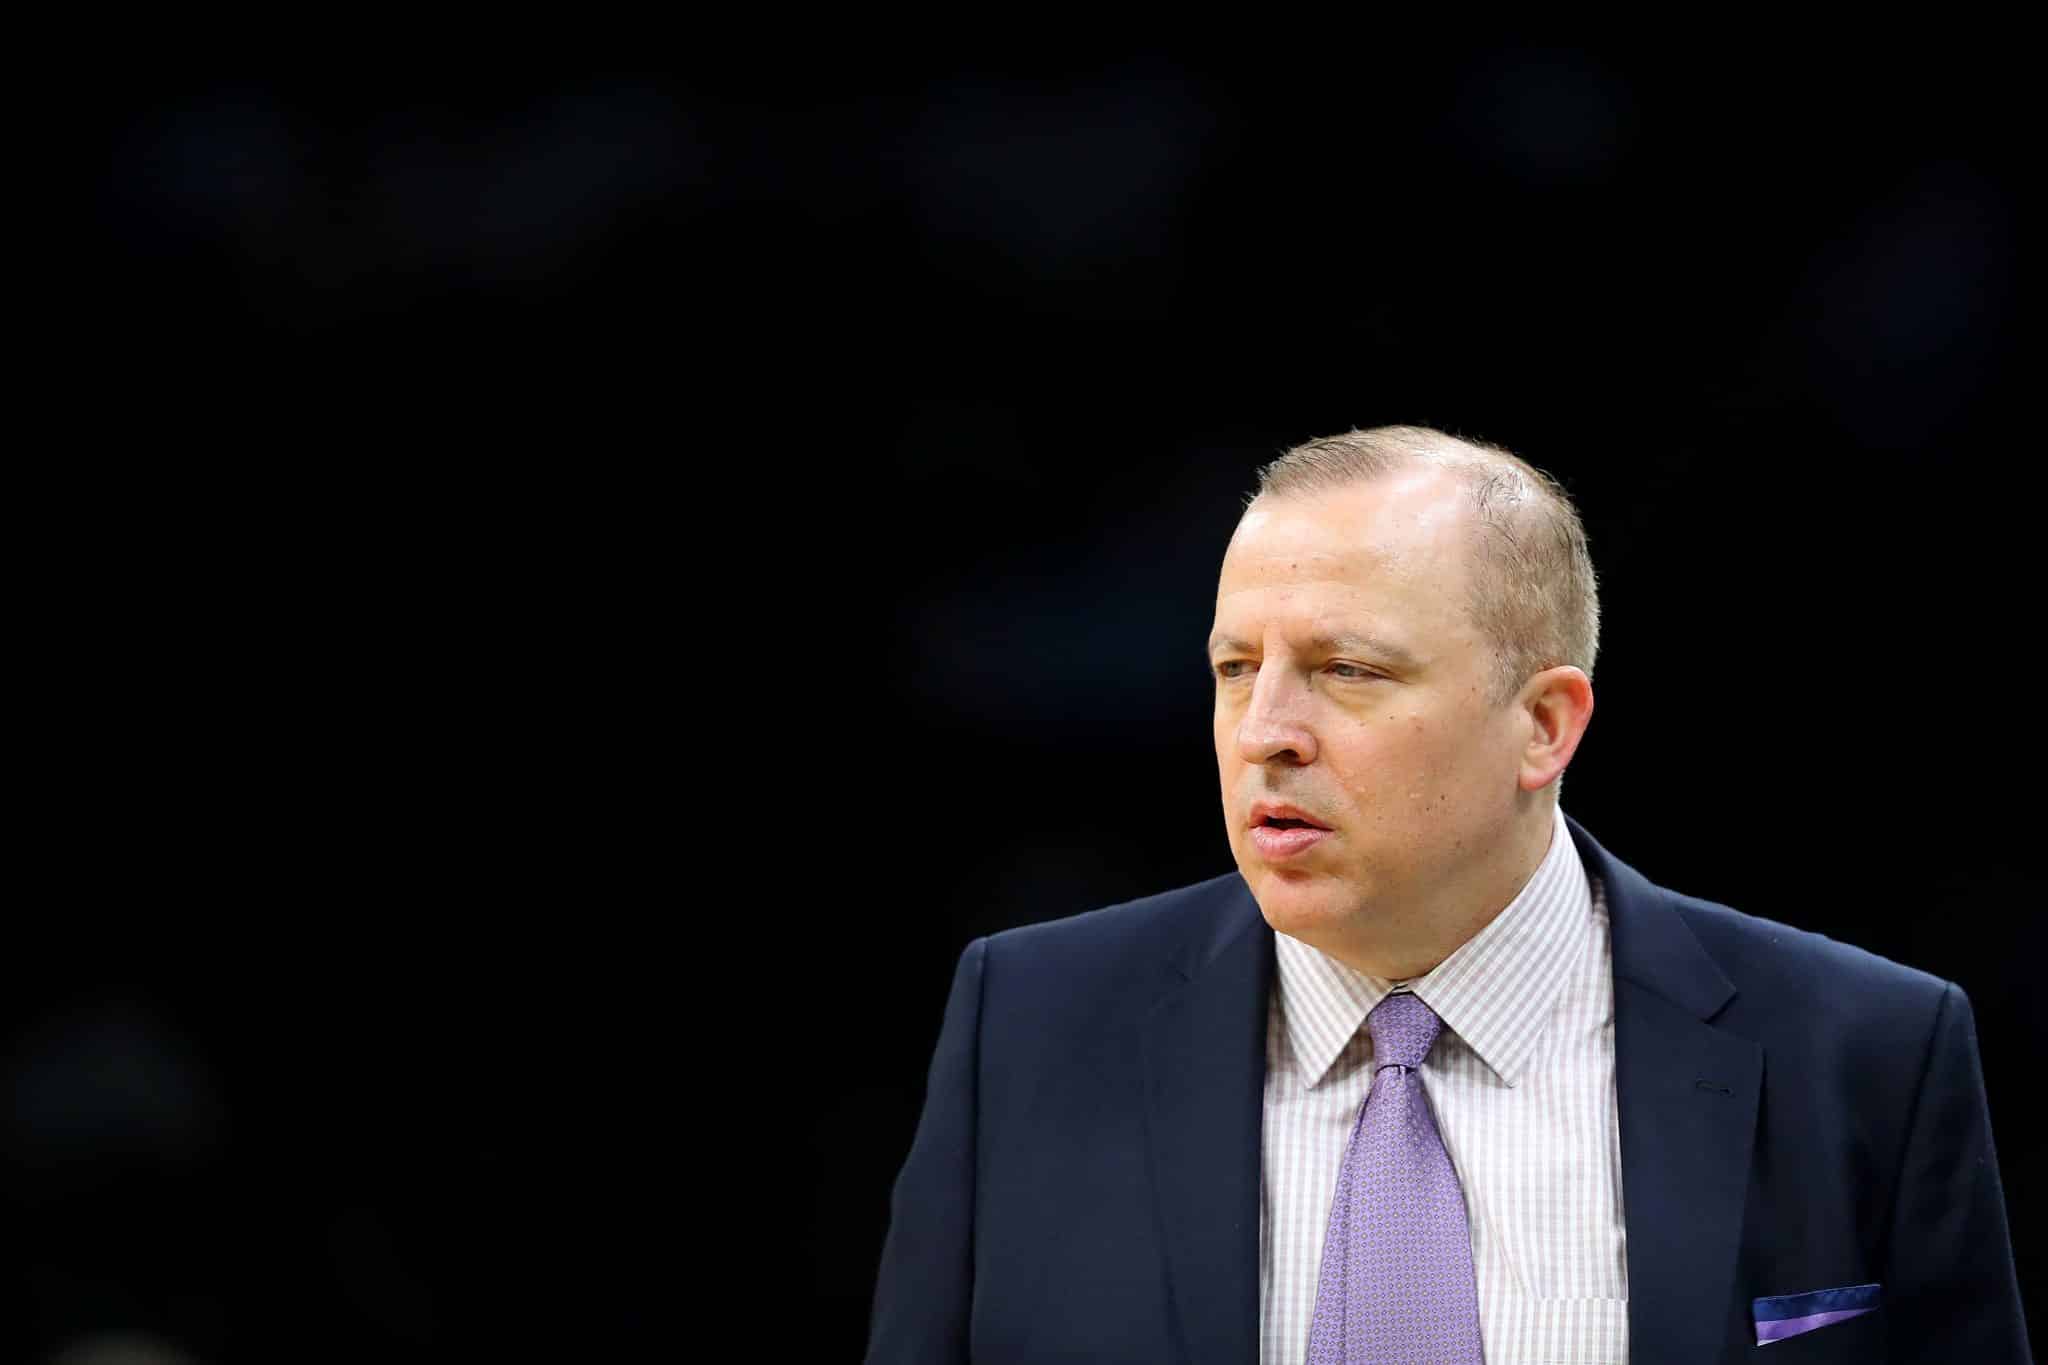 BOSTON, MASSACHUSETTS - JANUARY 02: Tom Thibodeau of the Minnesota Timberwolves looks on during the game against the Boston Celtics at TD Garden on January 02, 2019 in Boston, Massachusetts. NOTE TO USER: User expressly acknowledges and agrees that, by downloading and or using this photograph, User is consenting to the terms and conditions of the Getty Images License Agreement.